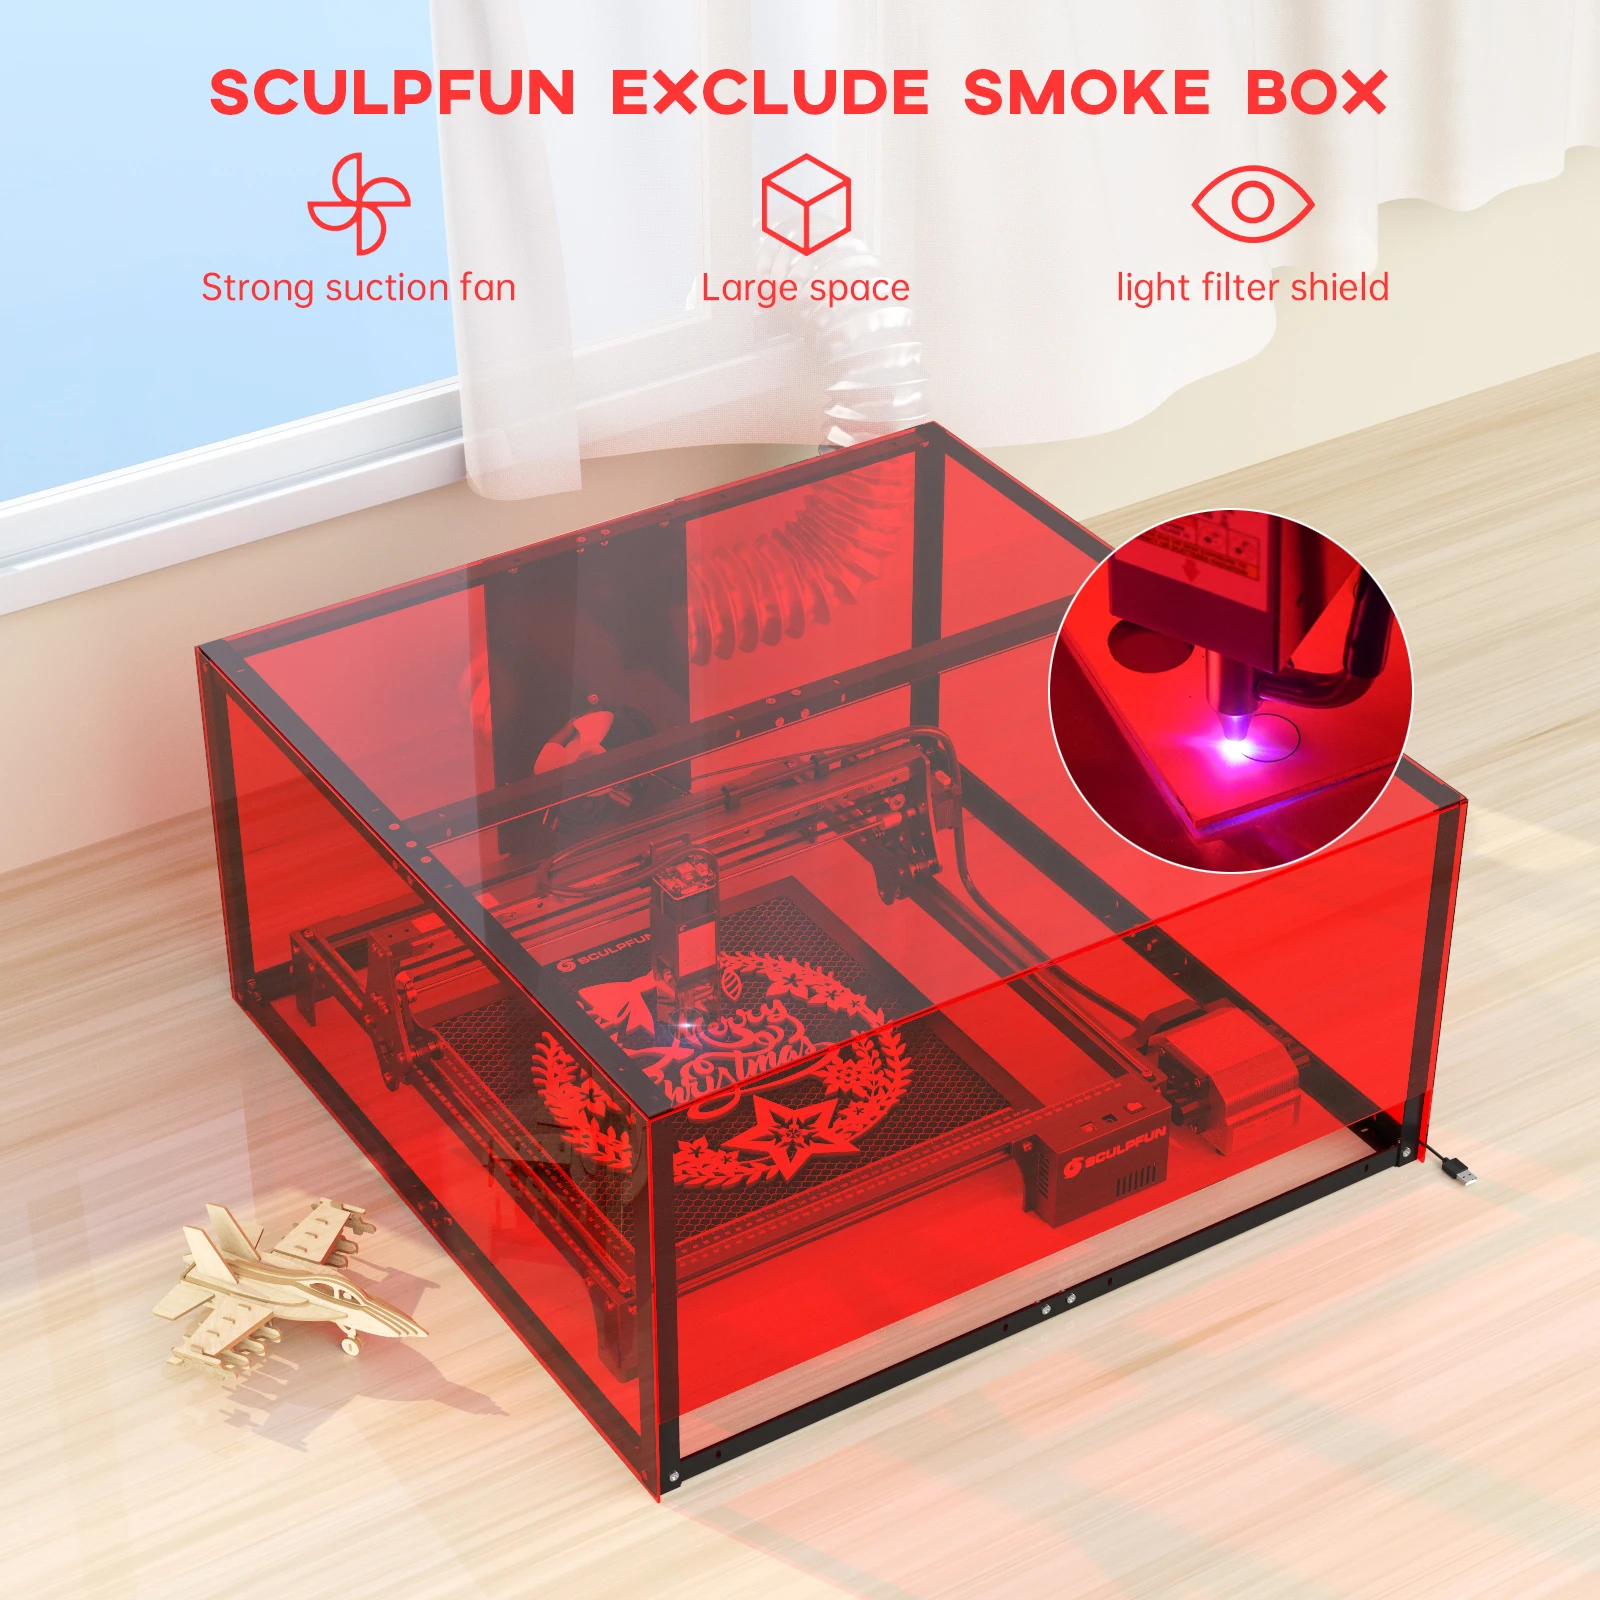 SCULPFUN Laser Engraving Machine PVC Enclosure Dust-proof Protective Box 720x720x360mm Smoke Exhaust with Powerful Suction Fan